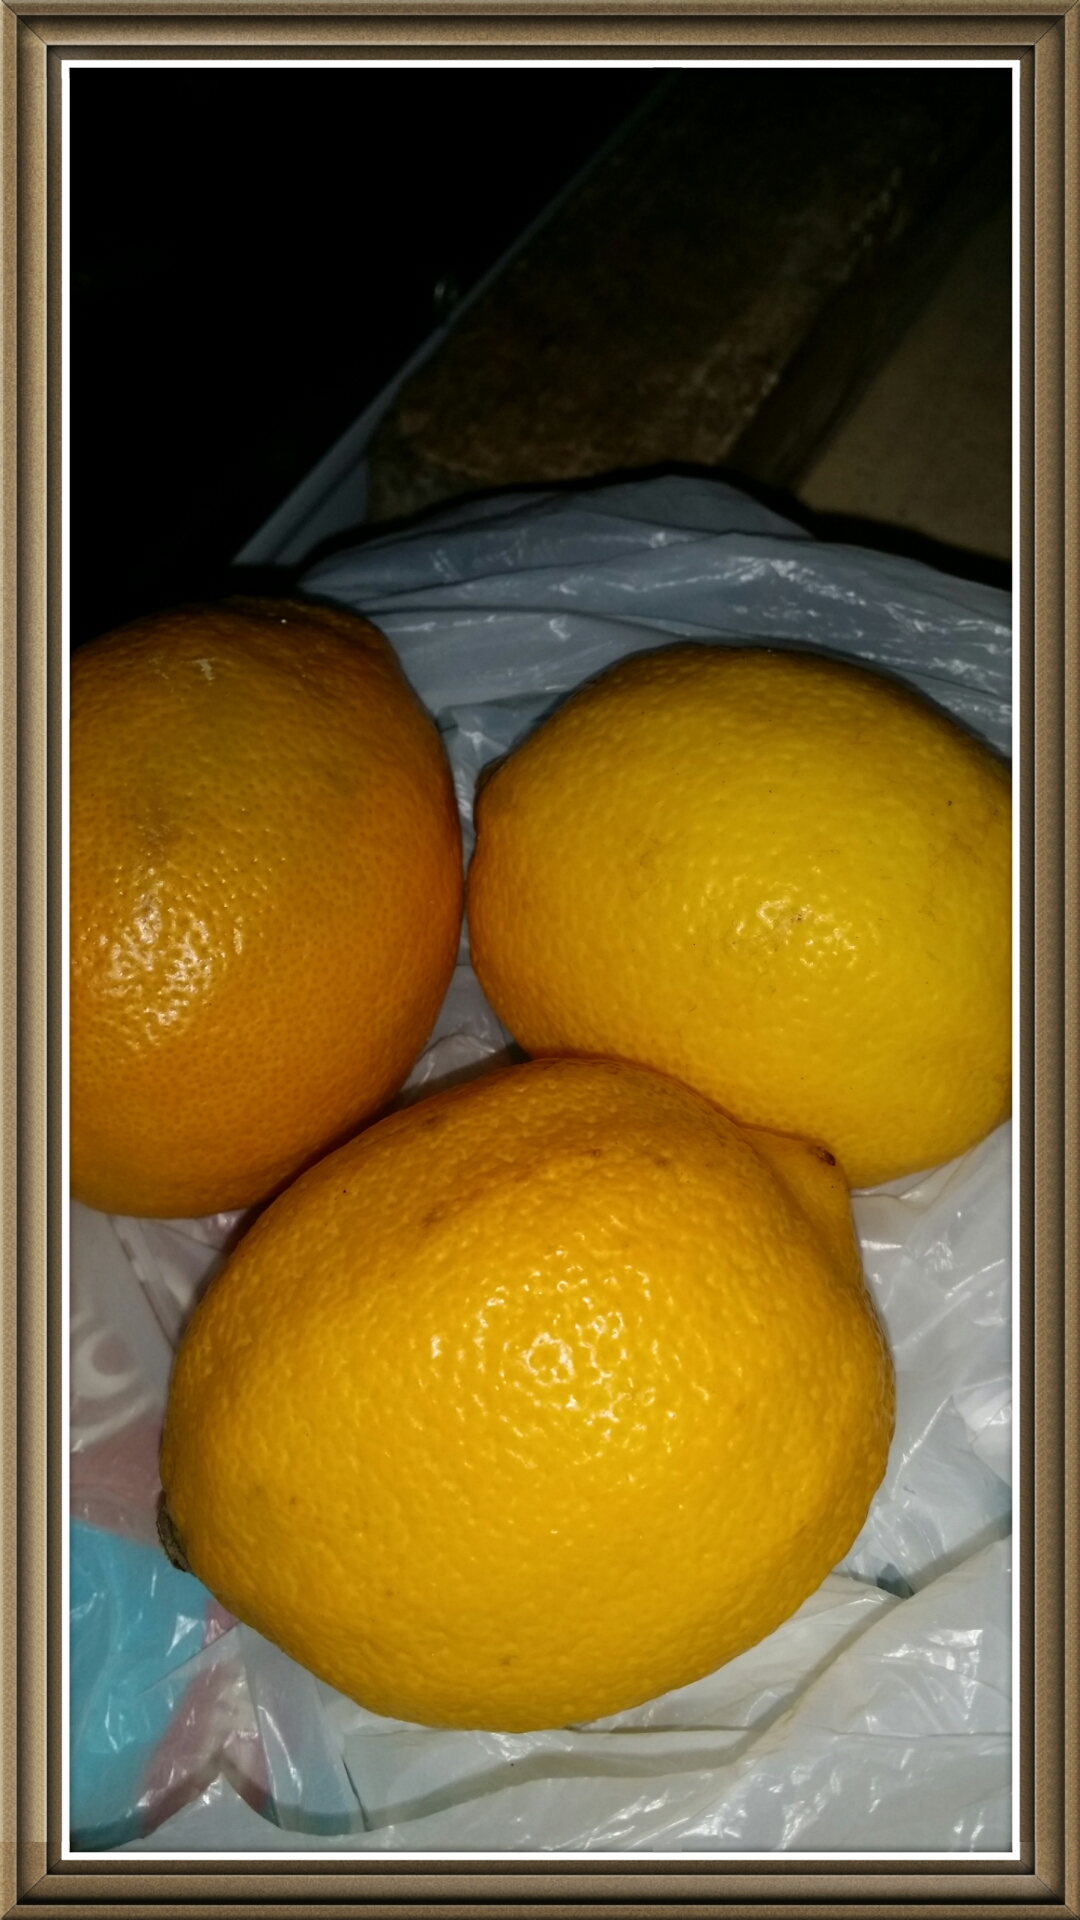 the 3 lemon fruits that my sister bought.